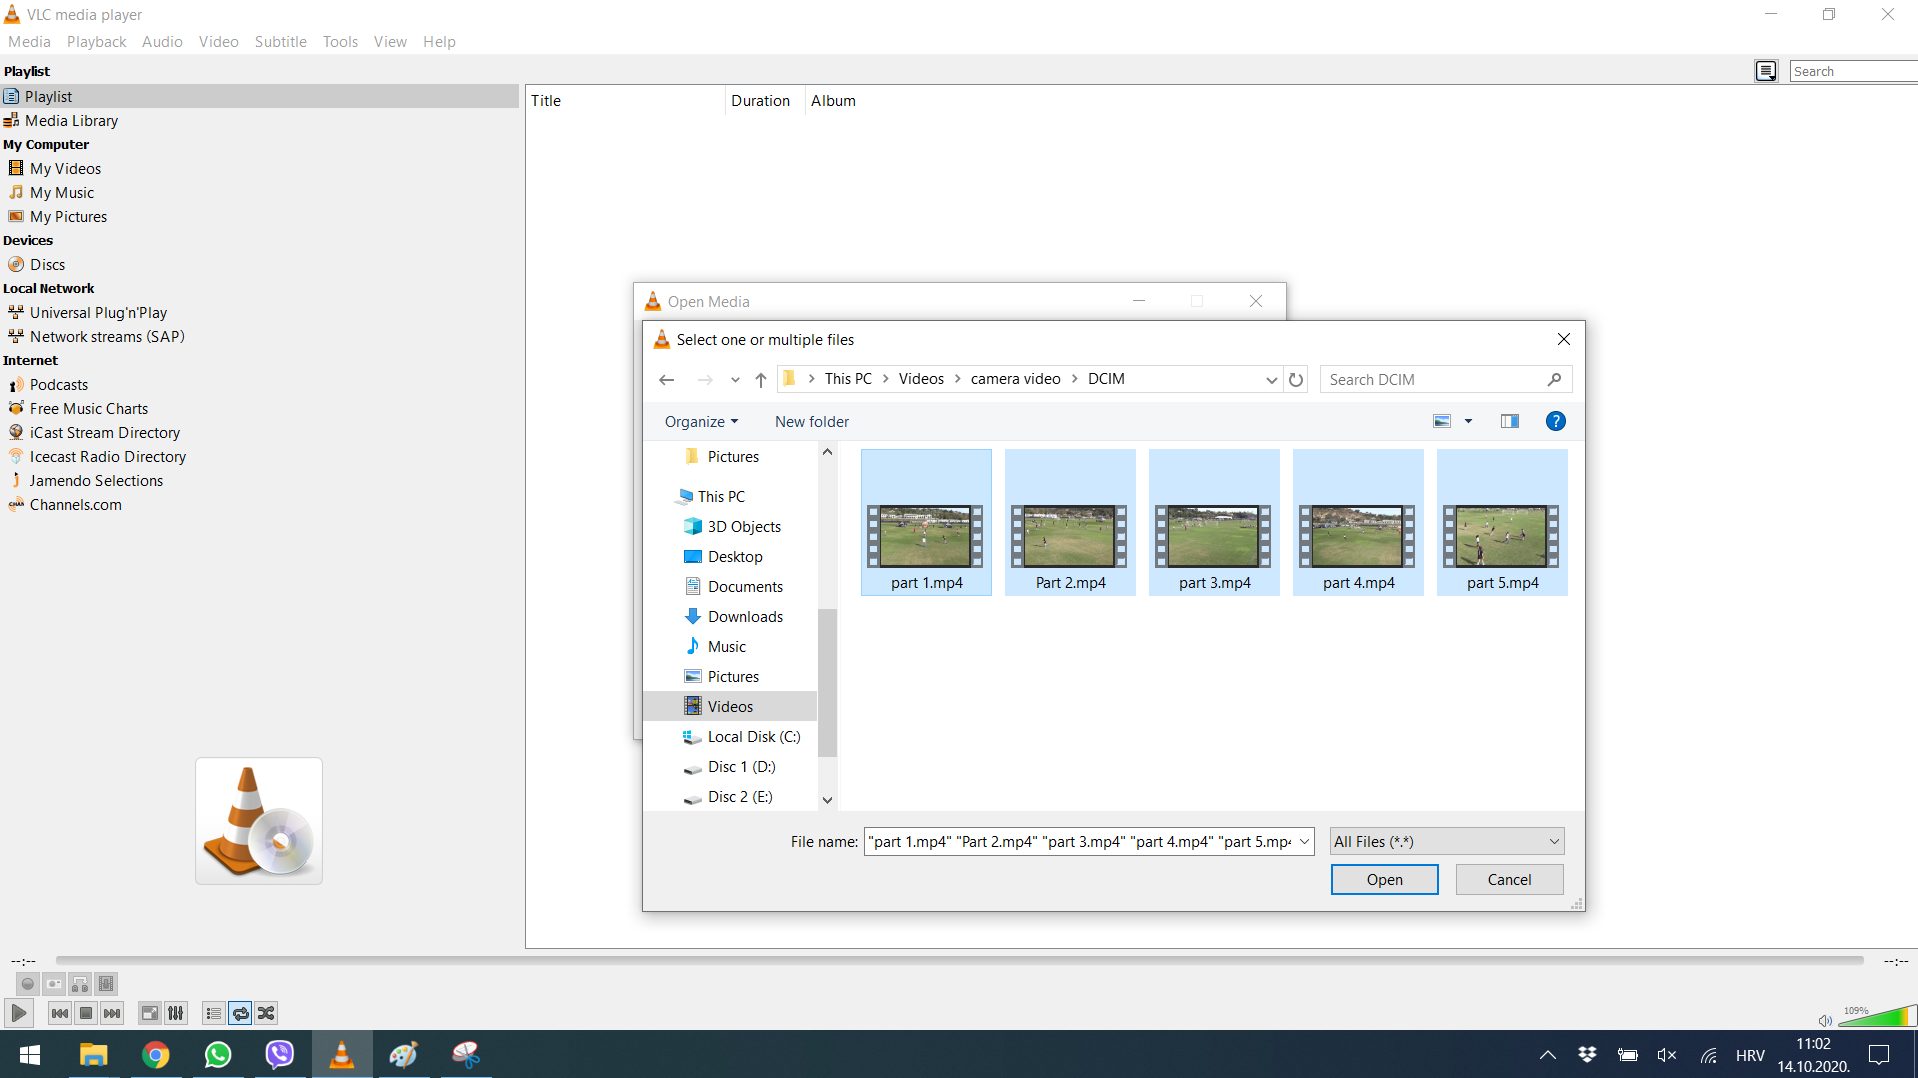 Step 2.2. add files - Once Video Analyser and VLC